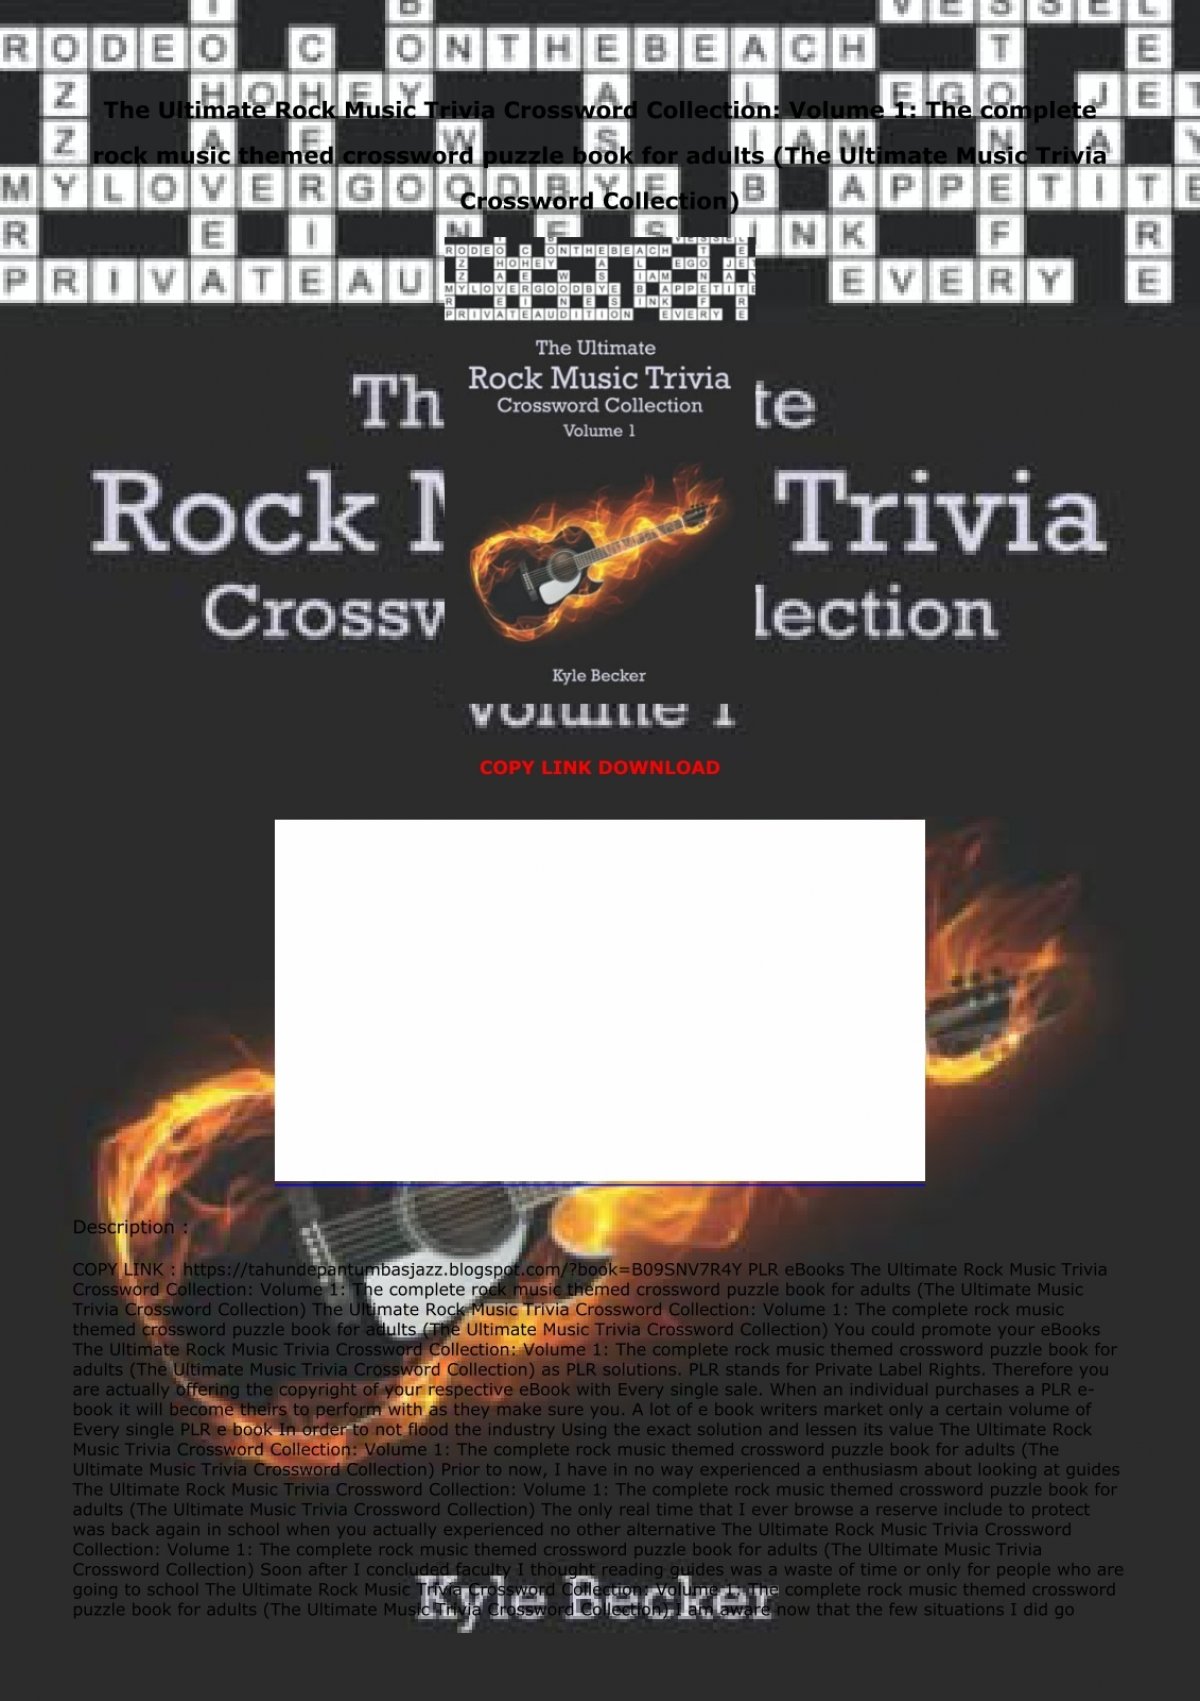 Ebook(download) The Ultimate Rock Music Trivia Crossword Collection